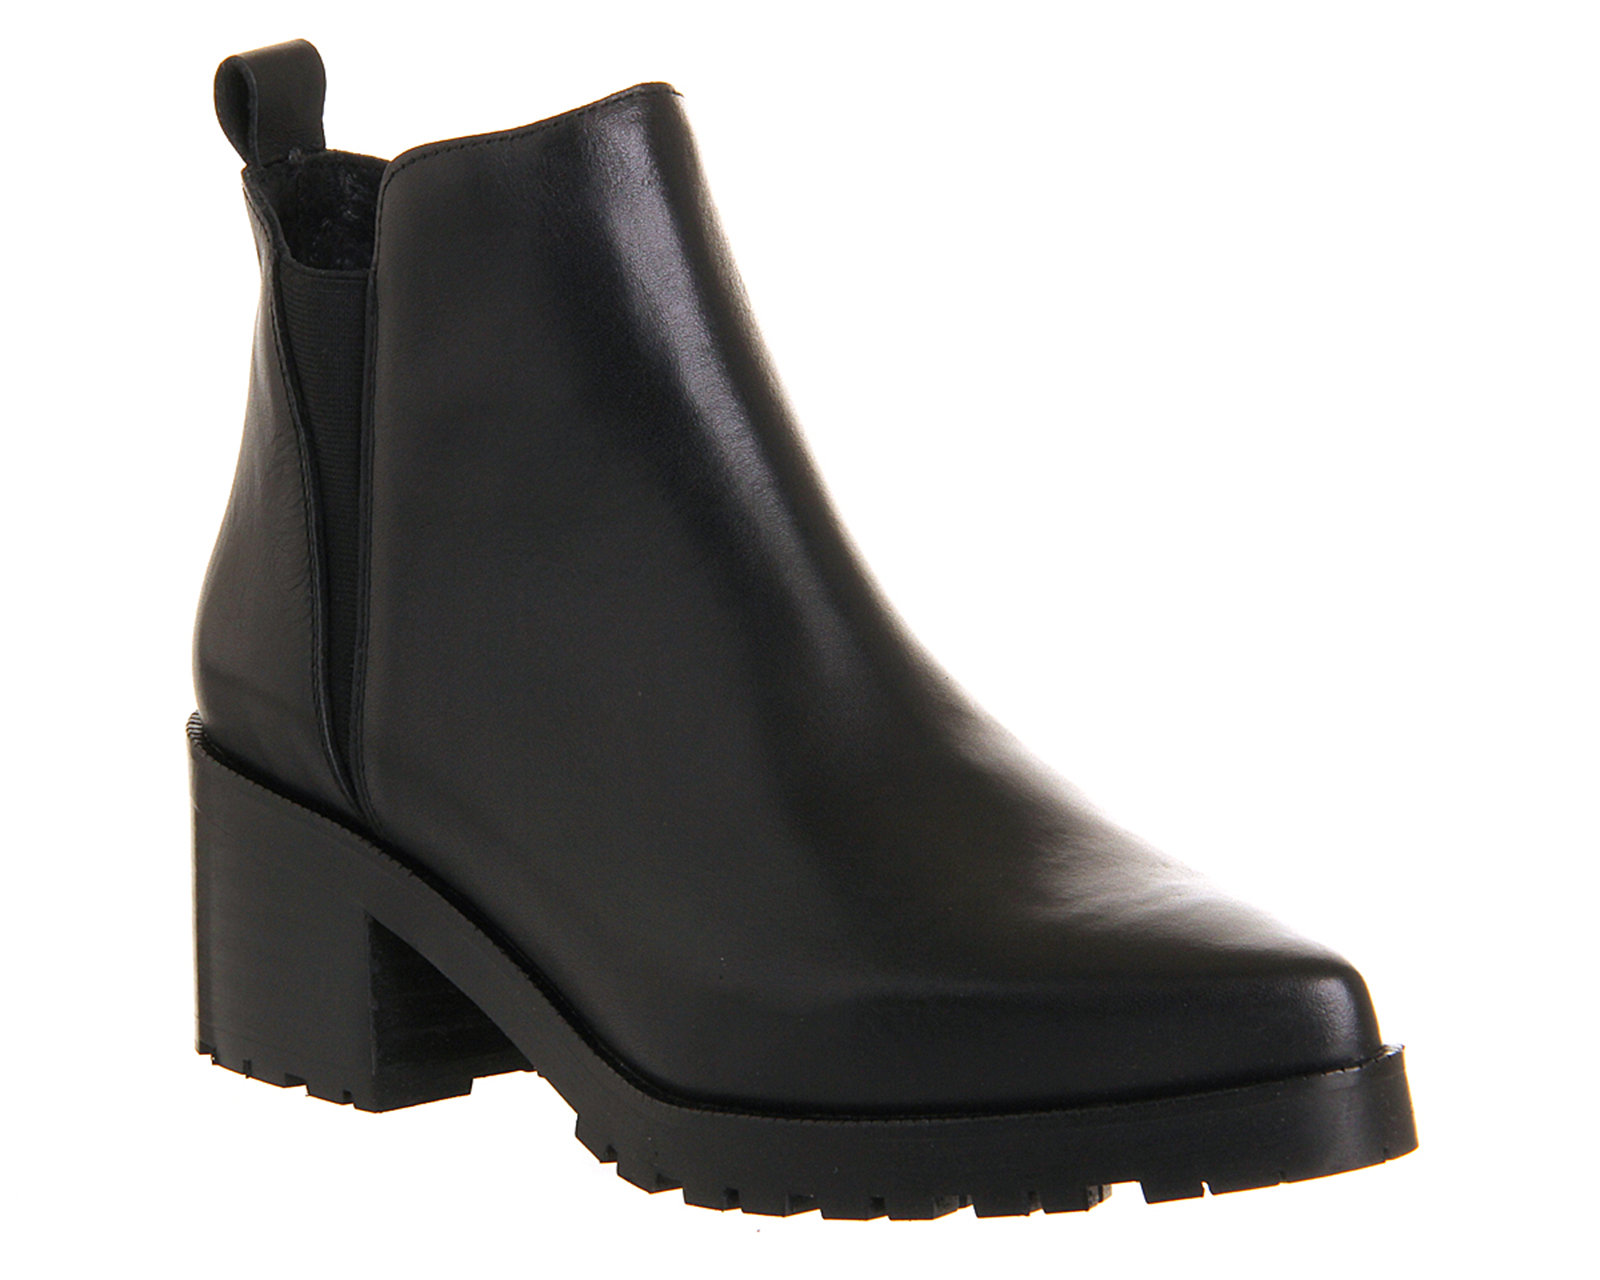 OFFICECactus Cleated Sole Chelsea BootsBlack Leather